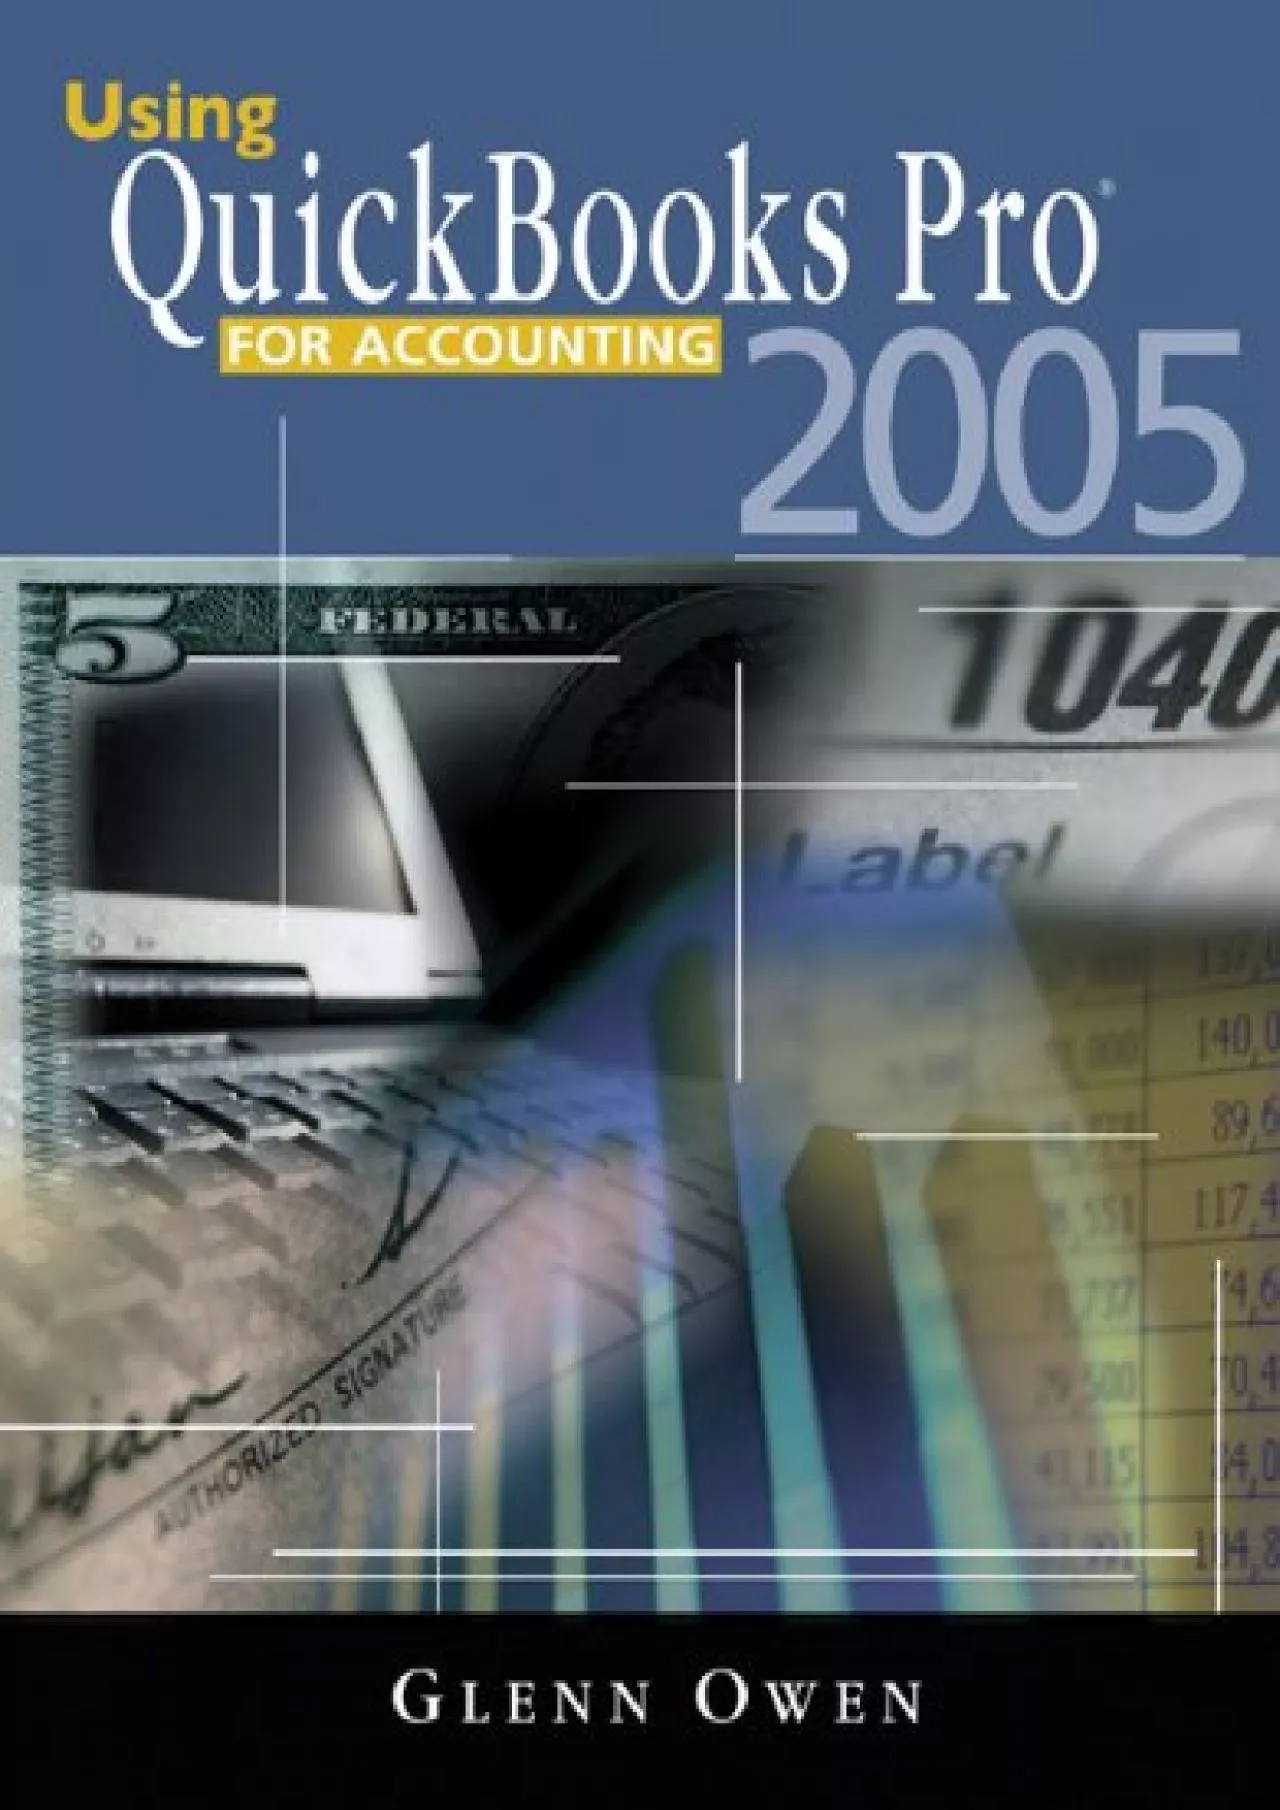 (EBOOK)-Using QuickBooks™ Pro 2005 for Accounting (with CD-ROM)